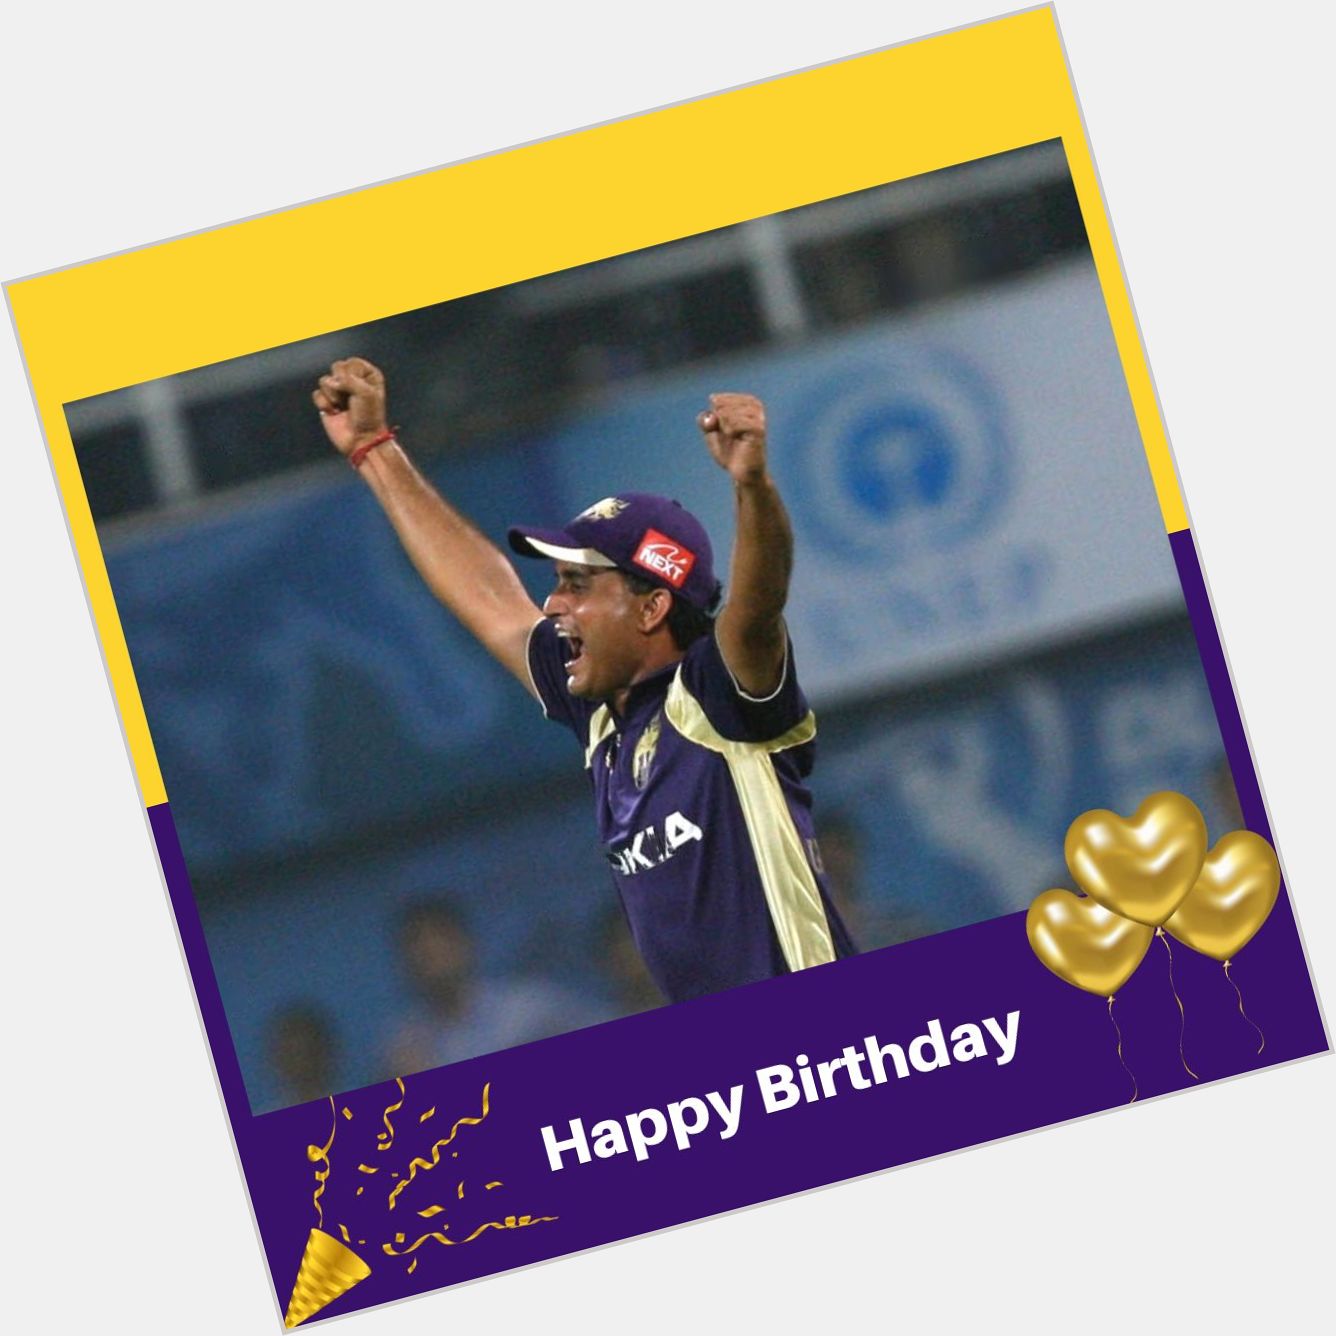        .      .      .

Join us in wishing a very happy birthday to our first captain Sourav Ganguly. 